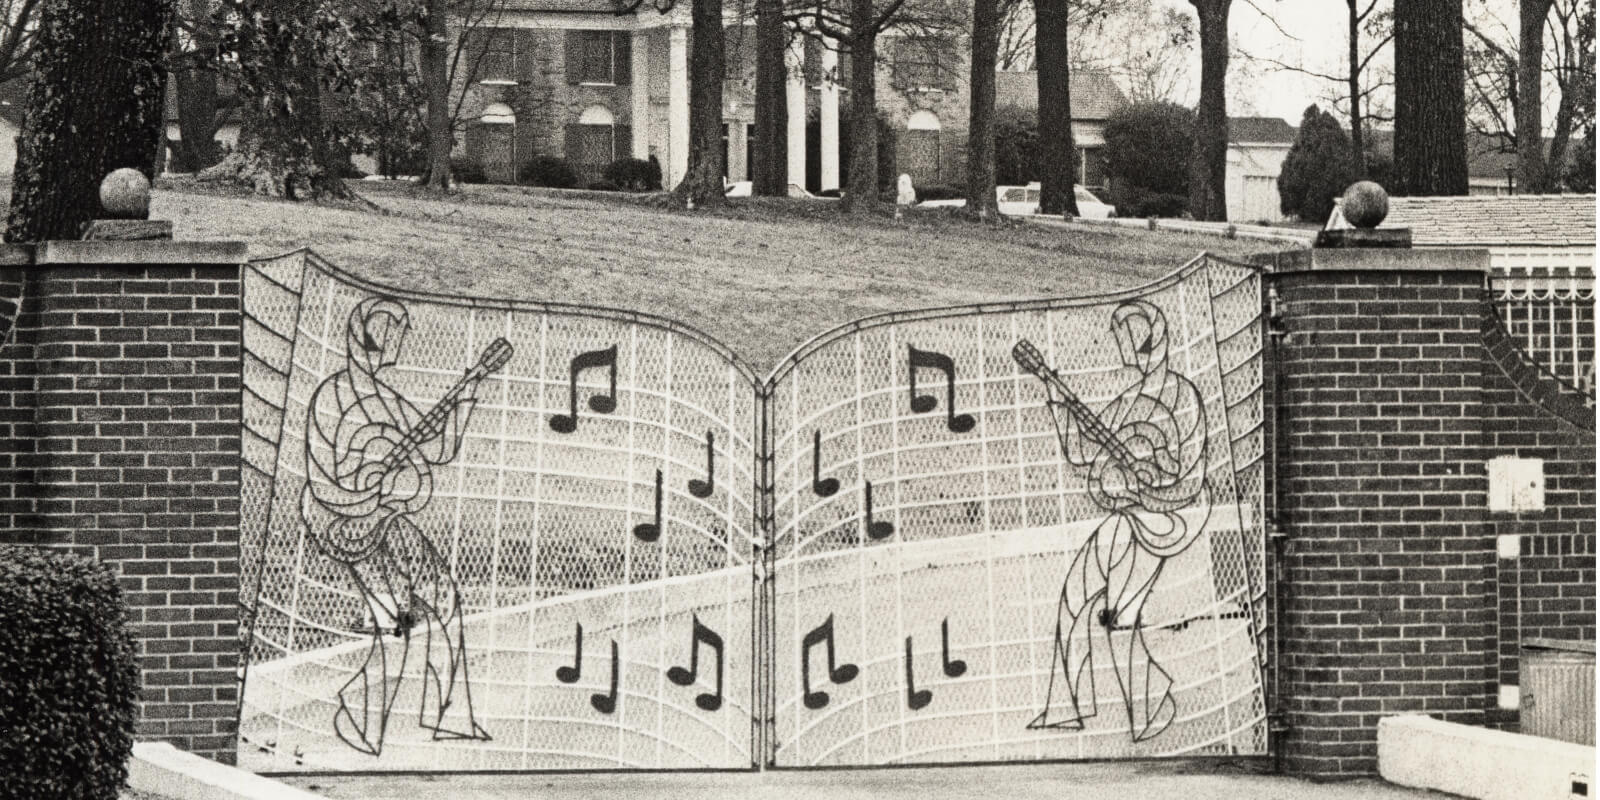 The music gates that secure Elvis Presley's Graceland were installed for one specific reason.